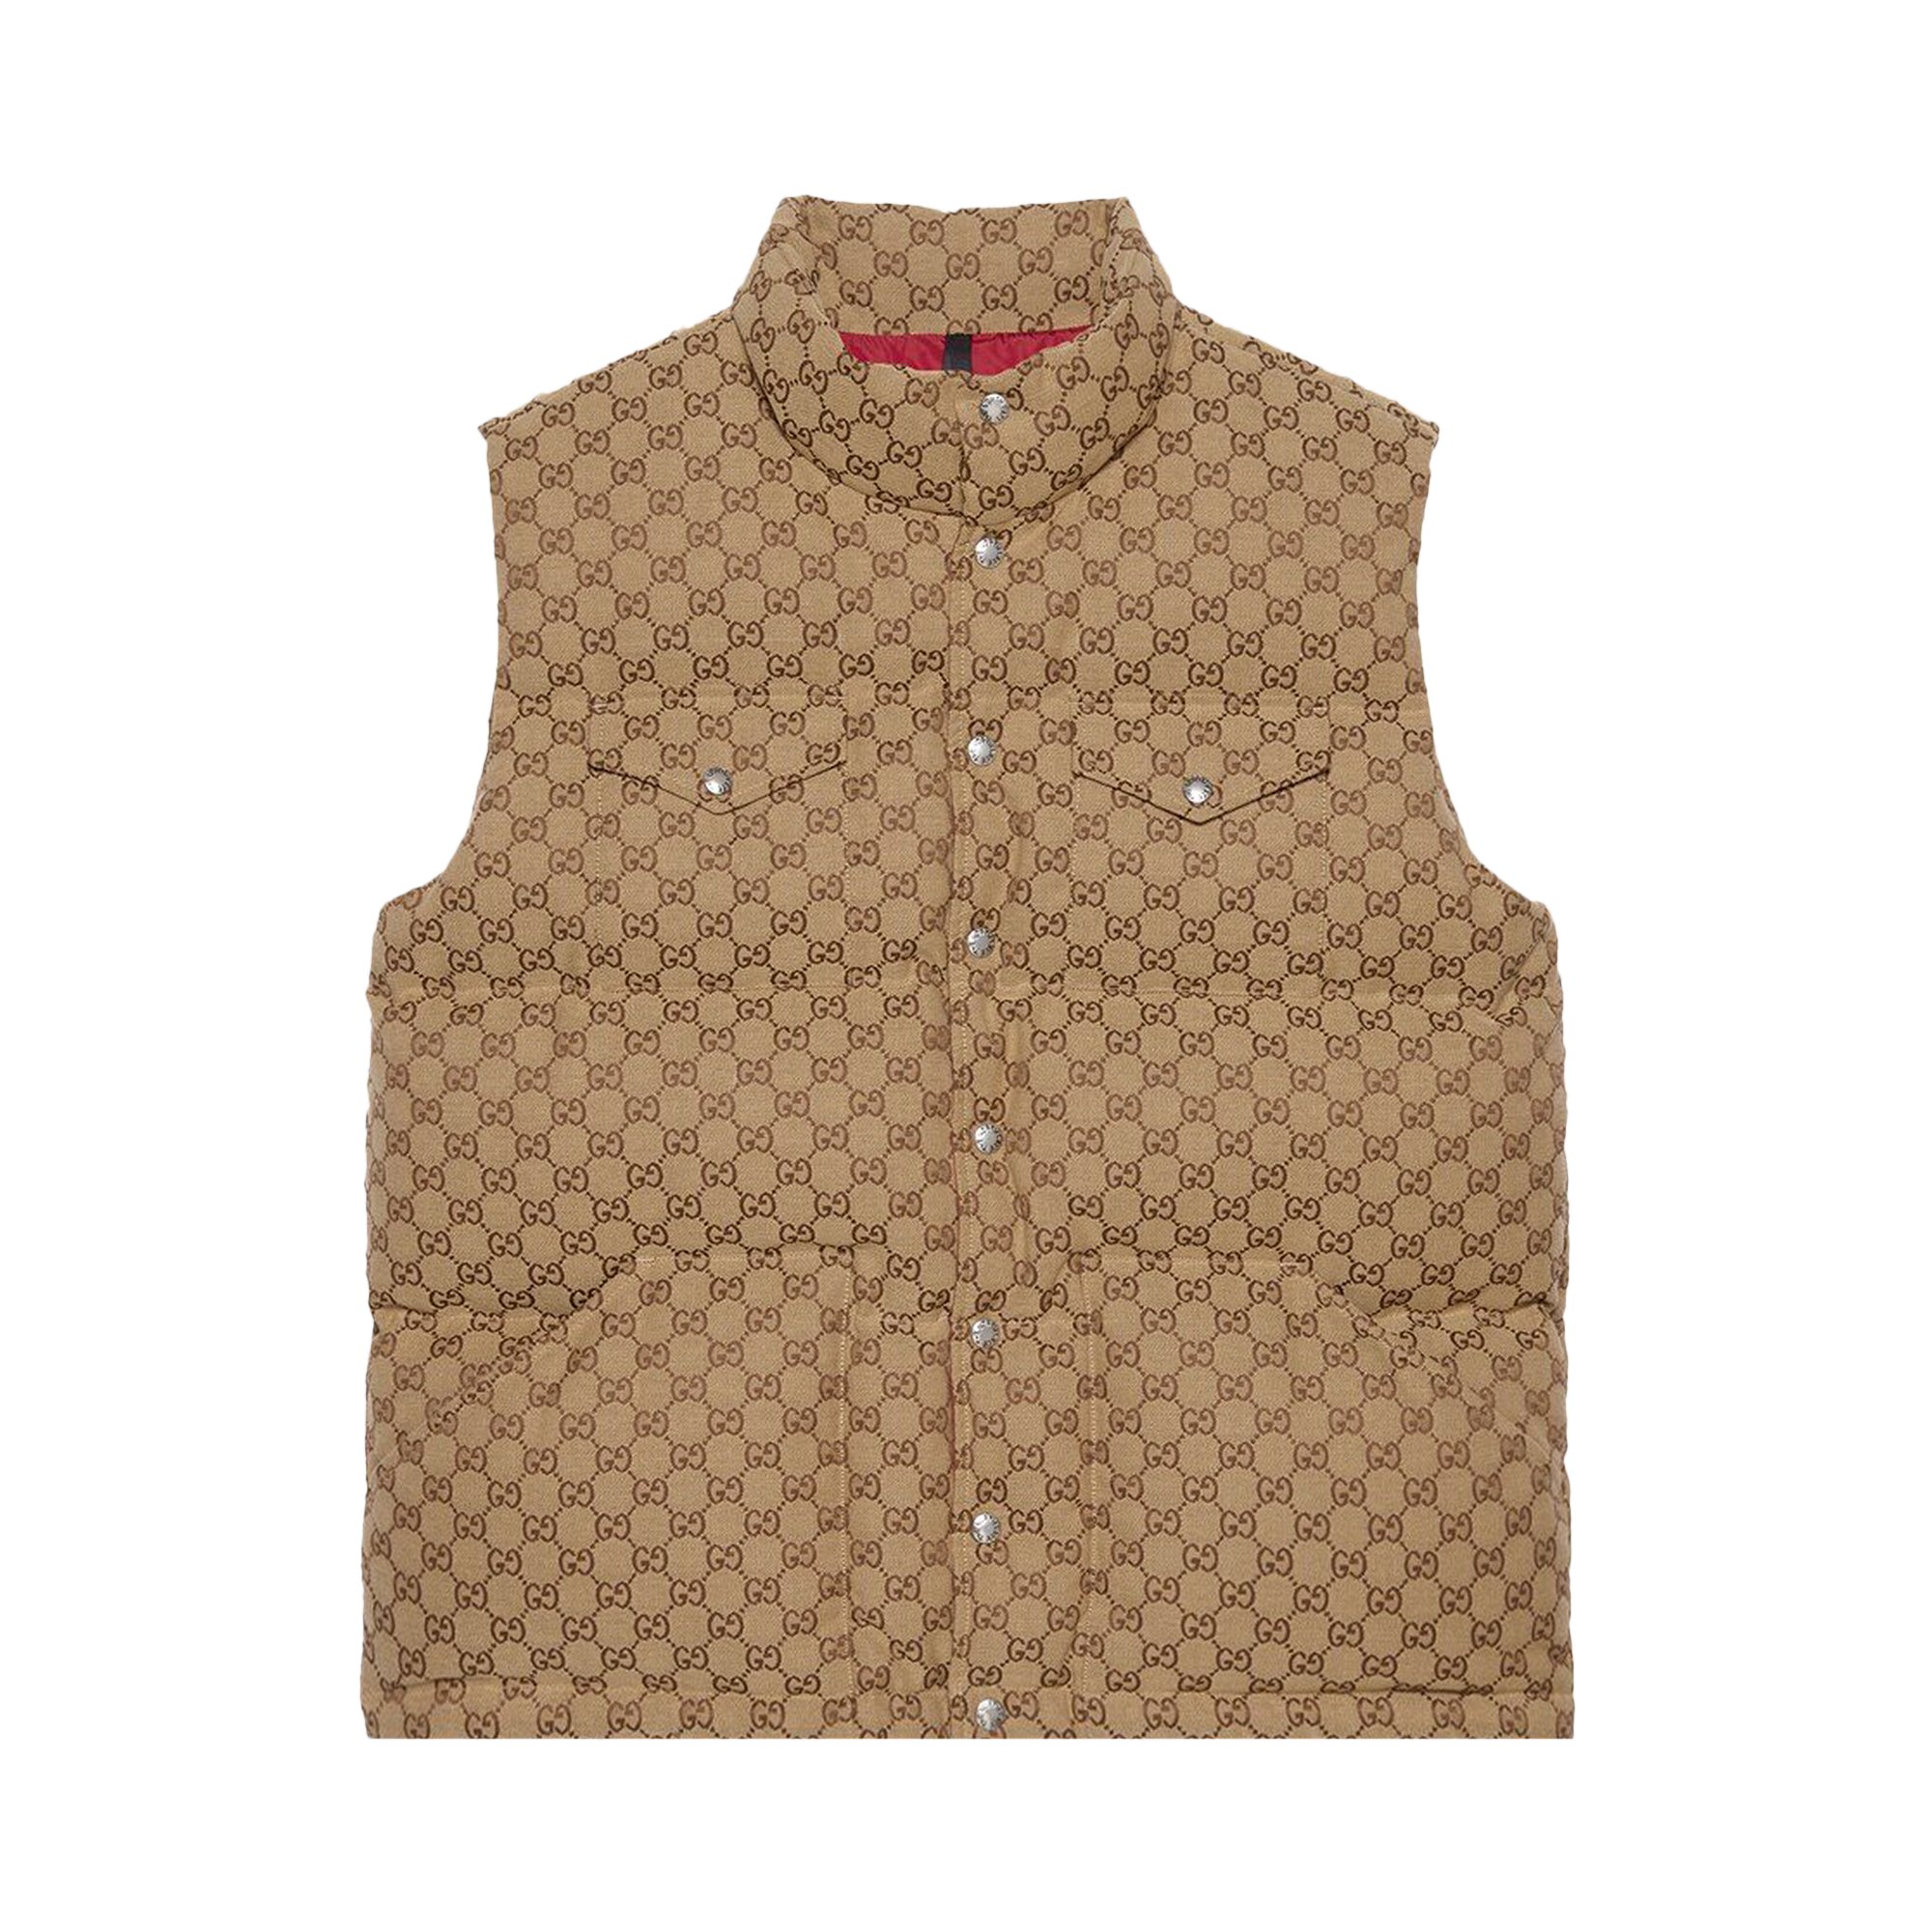 Buy Gucci x The North Face Down Vest 'Beige/Ebony' - 670768 Z8APY 